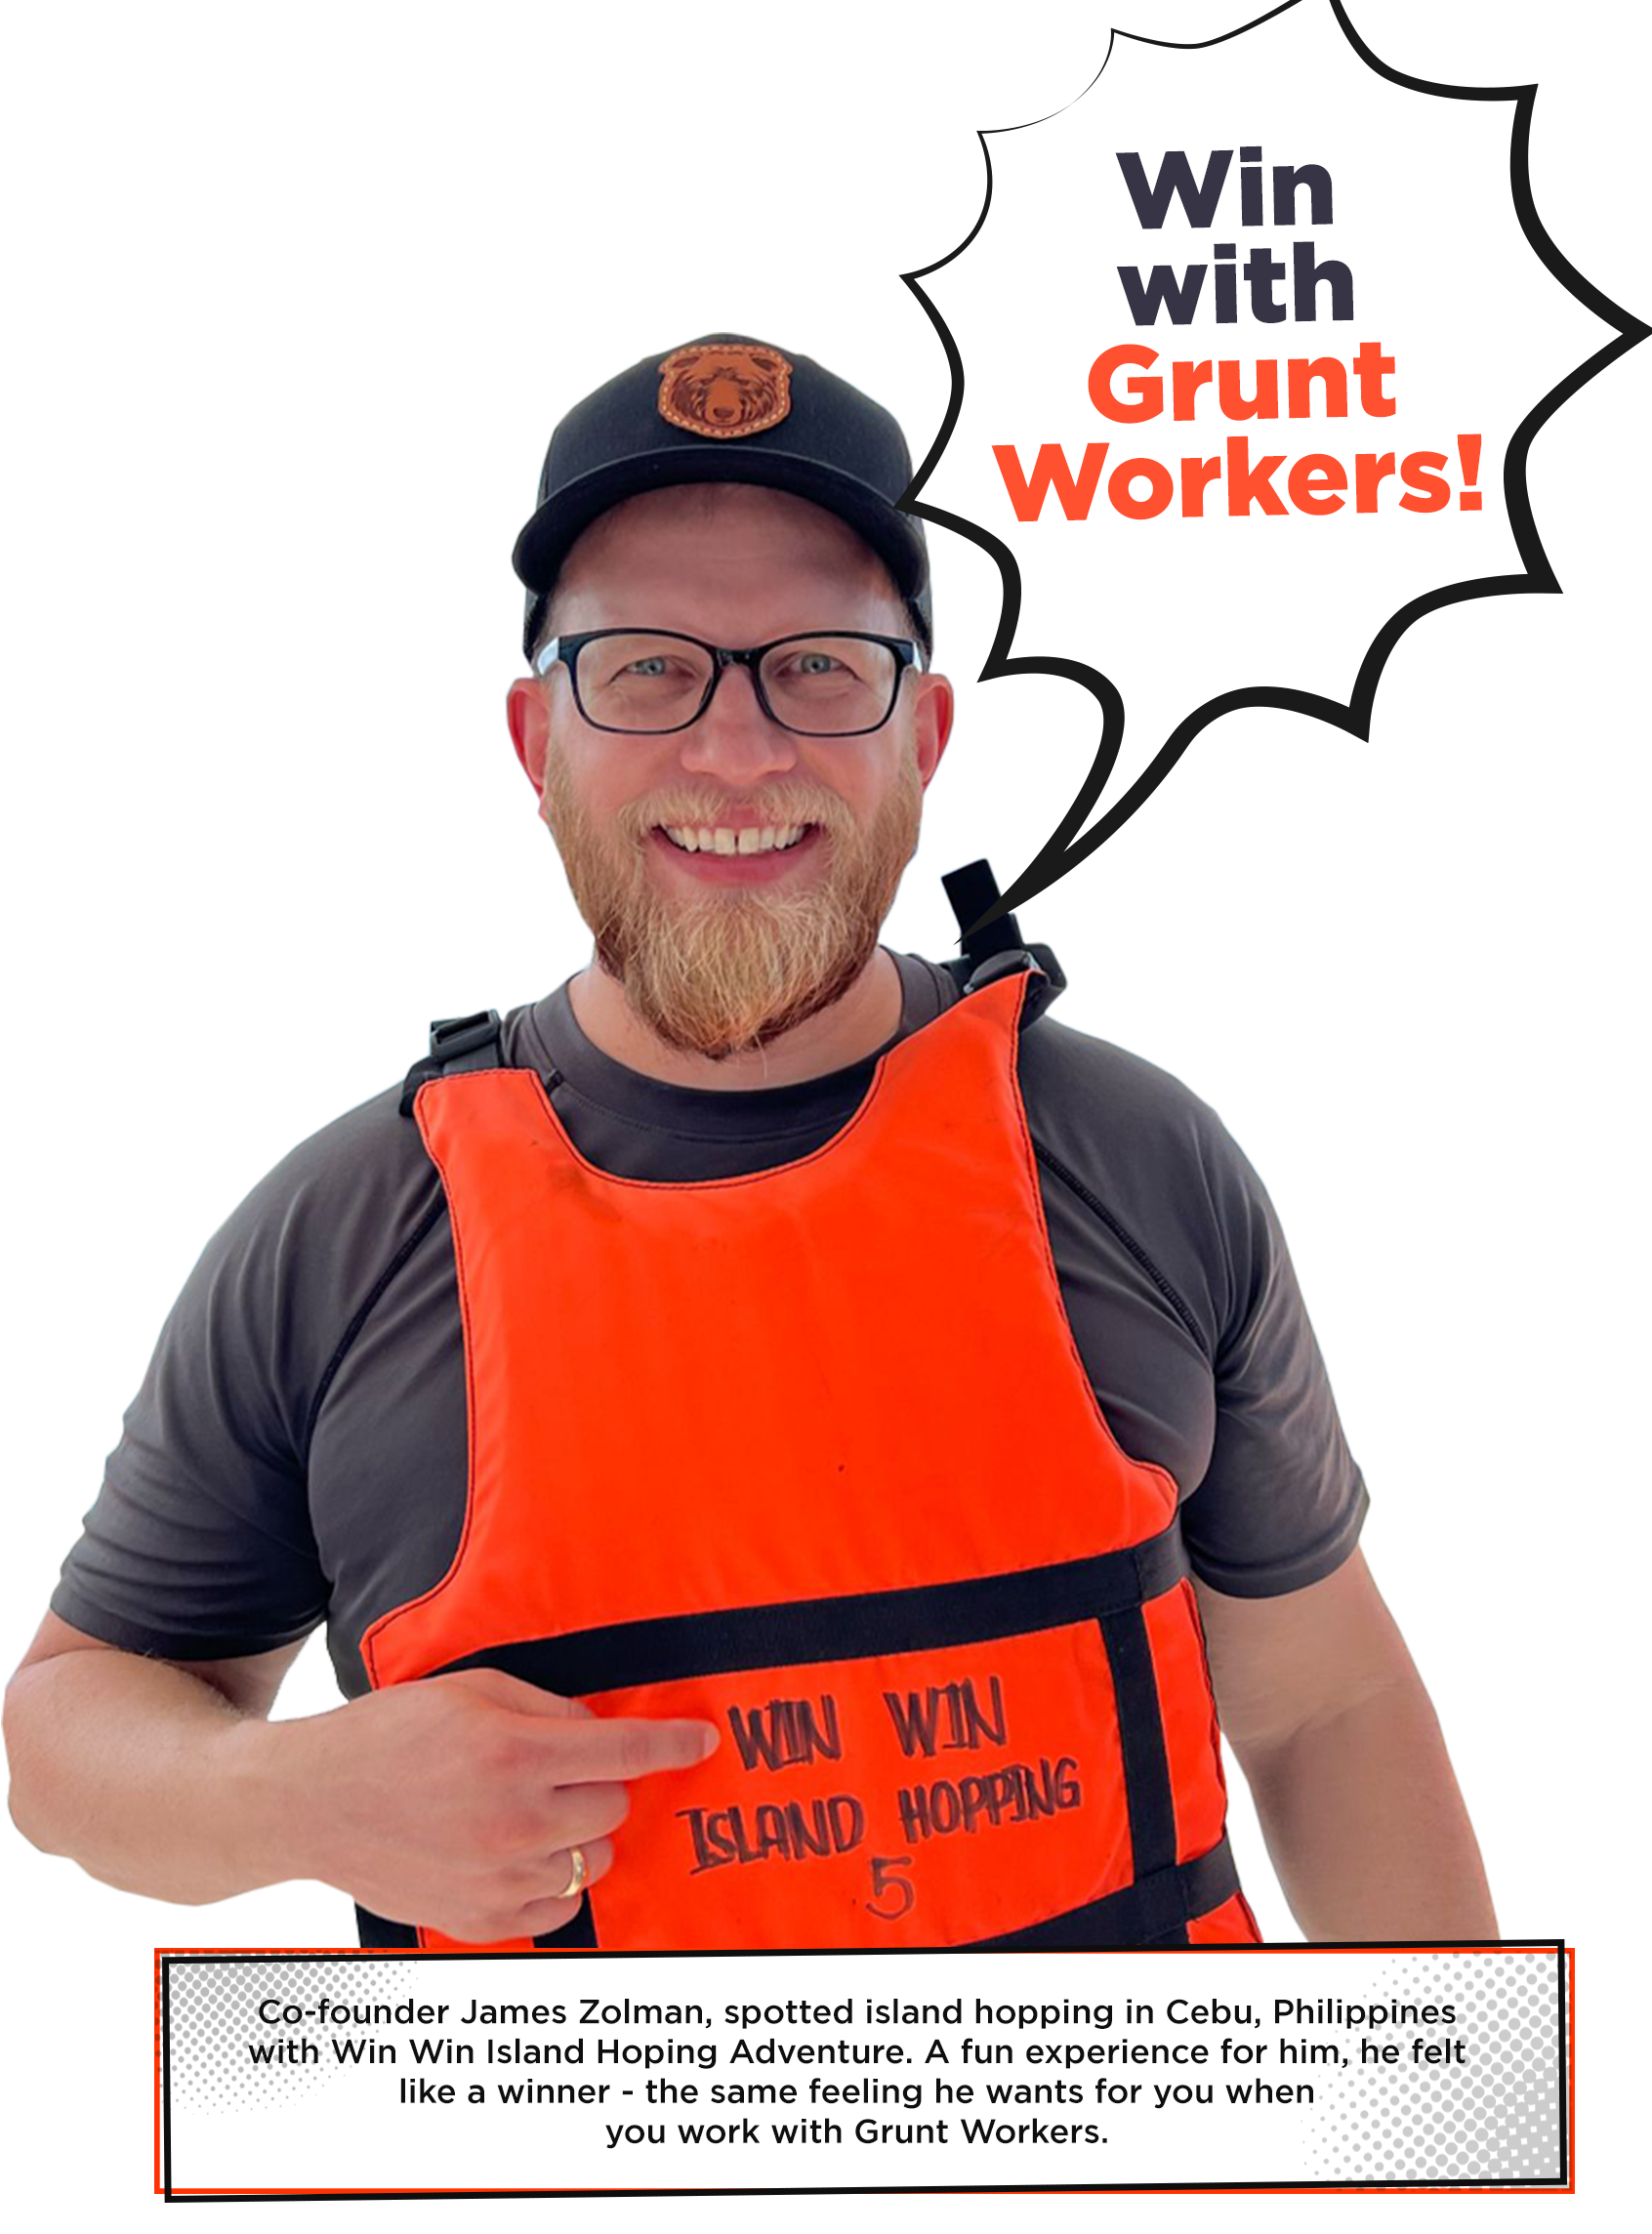 James Zolman grunt workers co-founder spotted island hopping in Cebu, Philippines with Win Win Island hoping adventure wearing lifevest